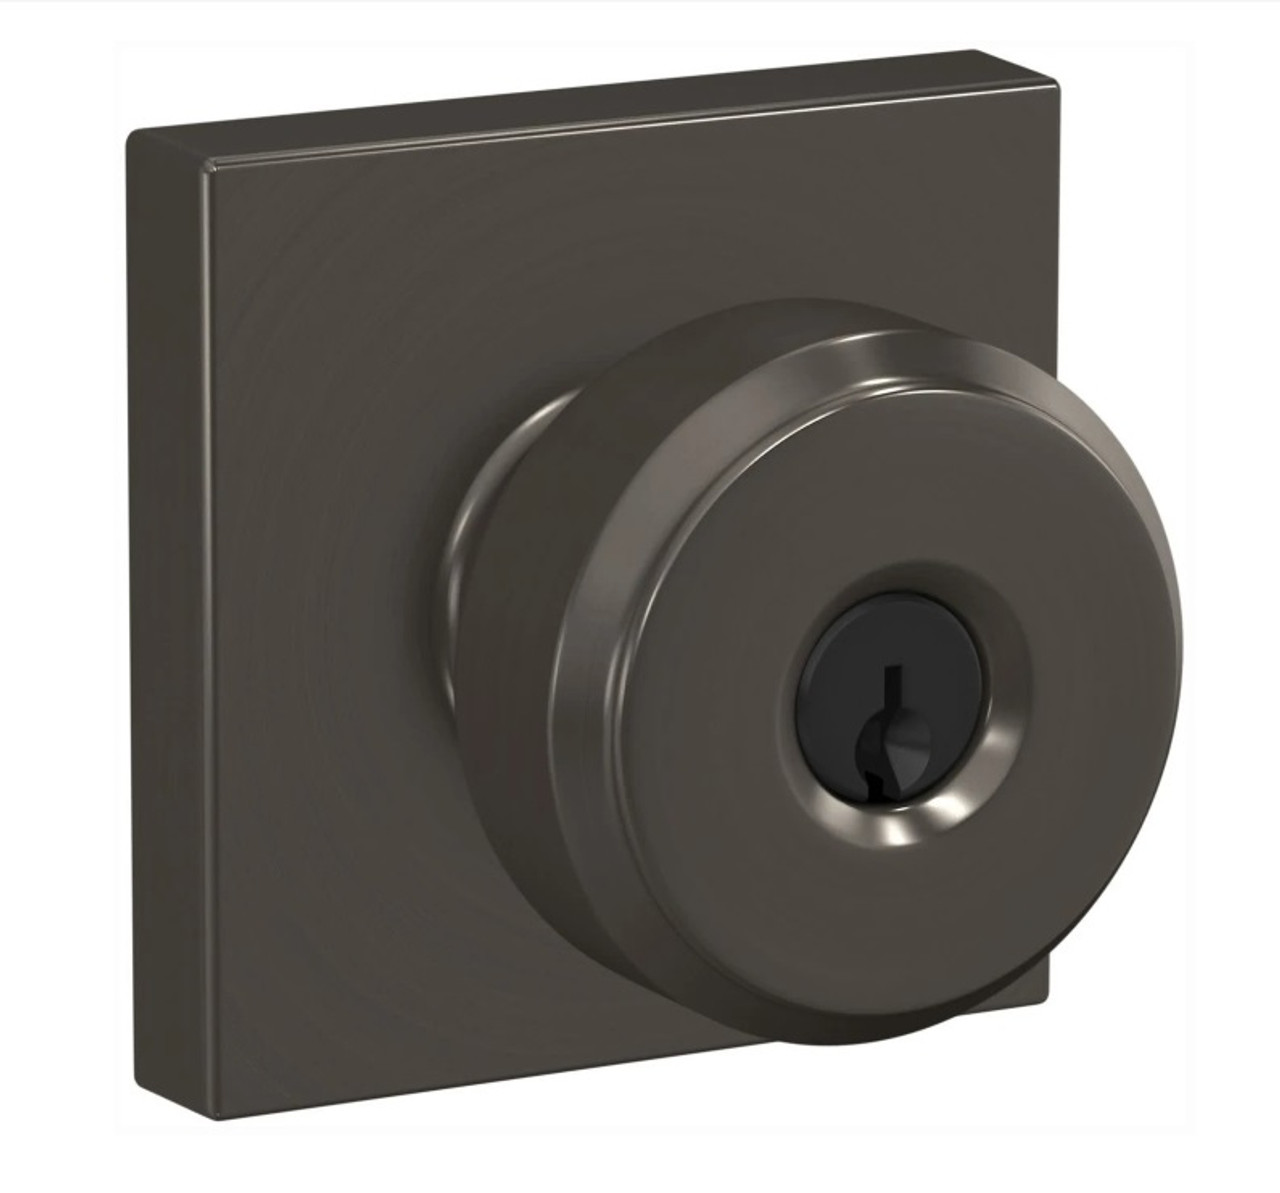 Schlage F51ABWE530COL Bowery Knob with Collins Rose Keyed Entry